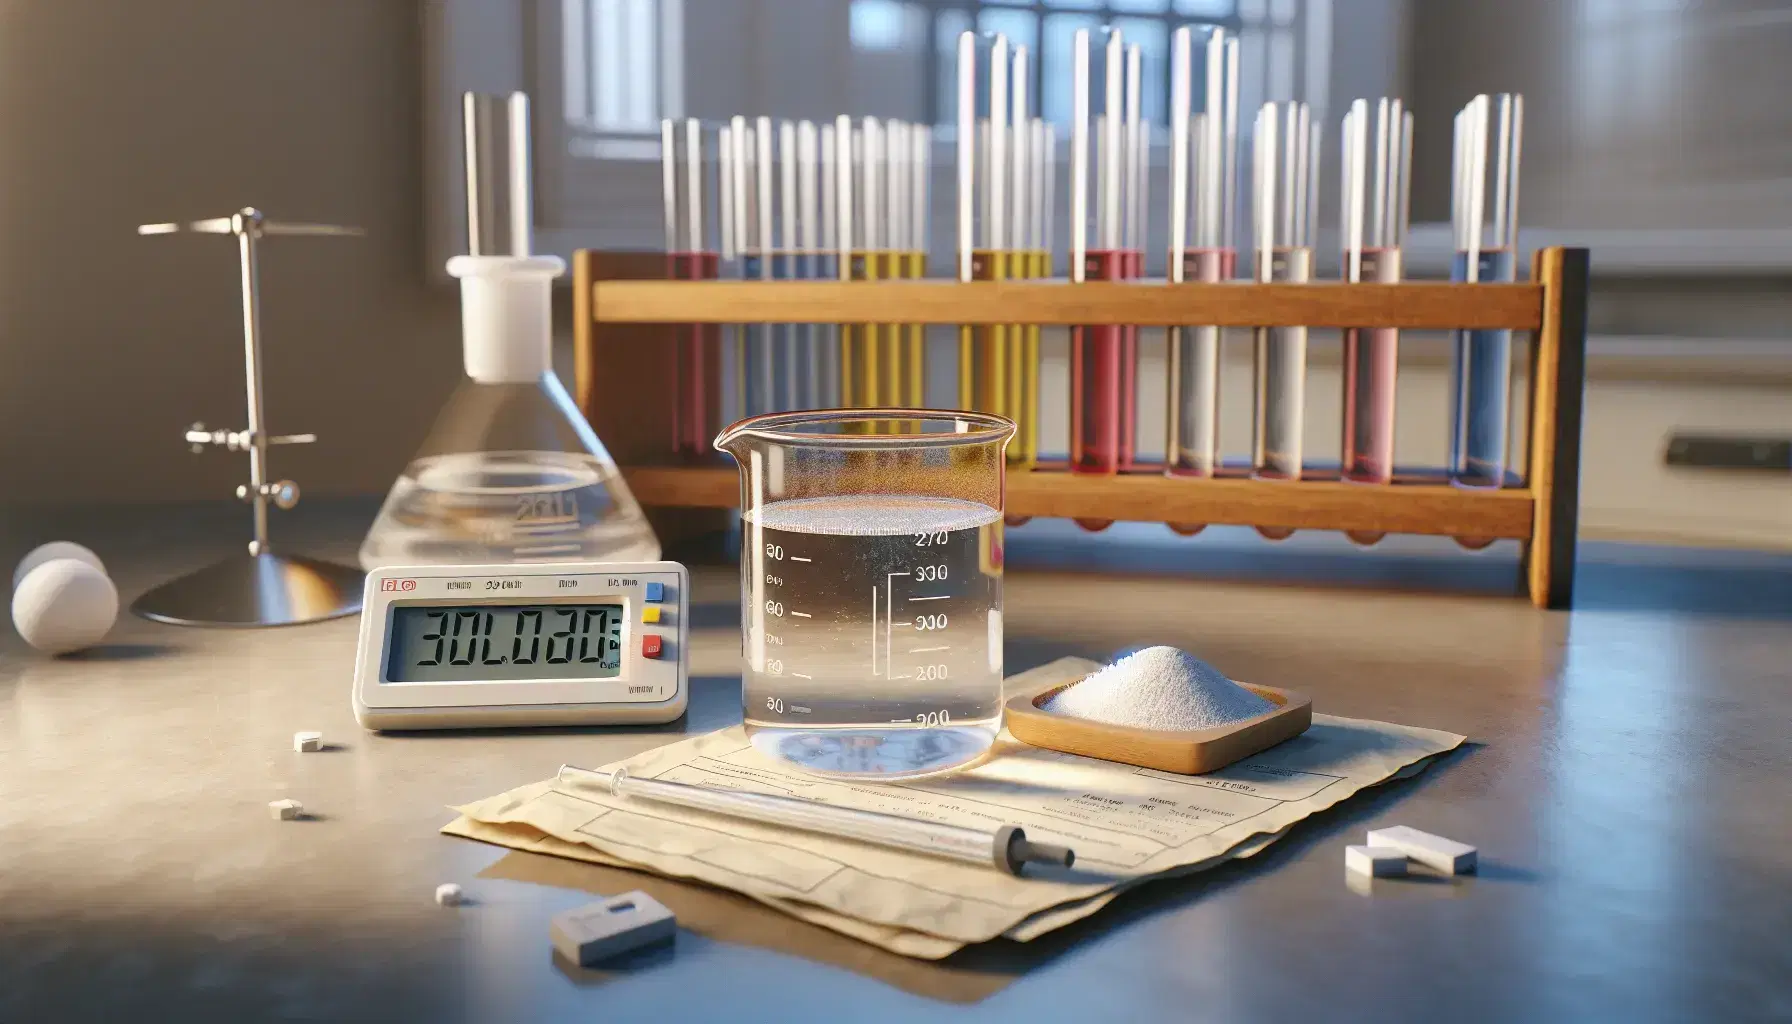 Laboratory with glass beaker and transparent liquid, digital pH meter inserted, white crystalline powder on weighing paper and blurry colored test tubes.